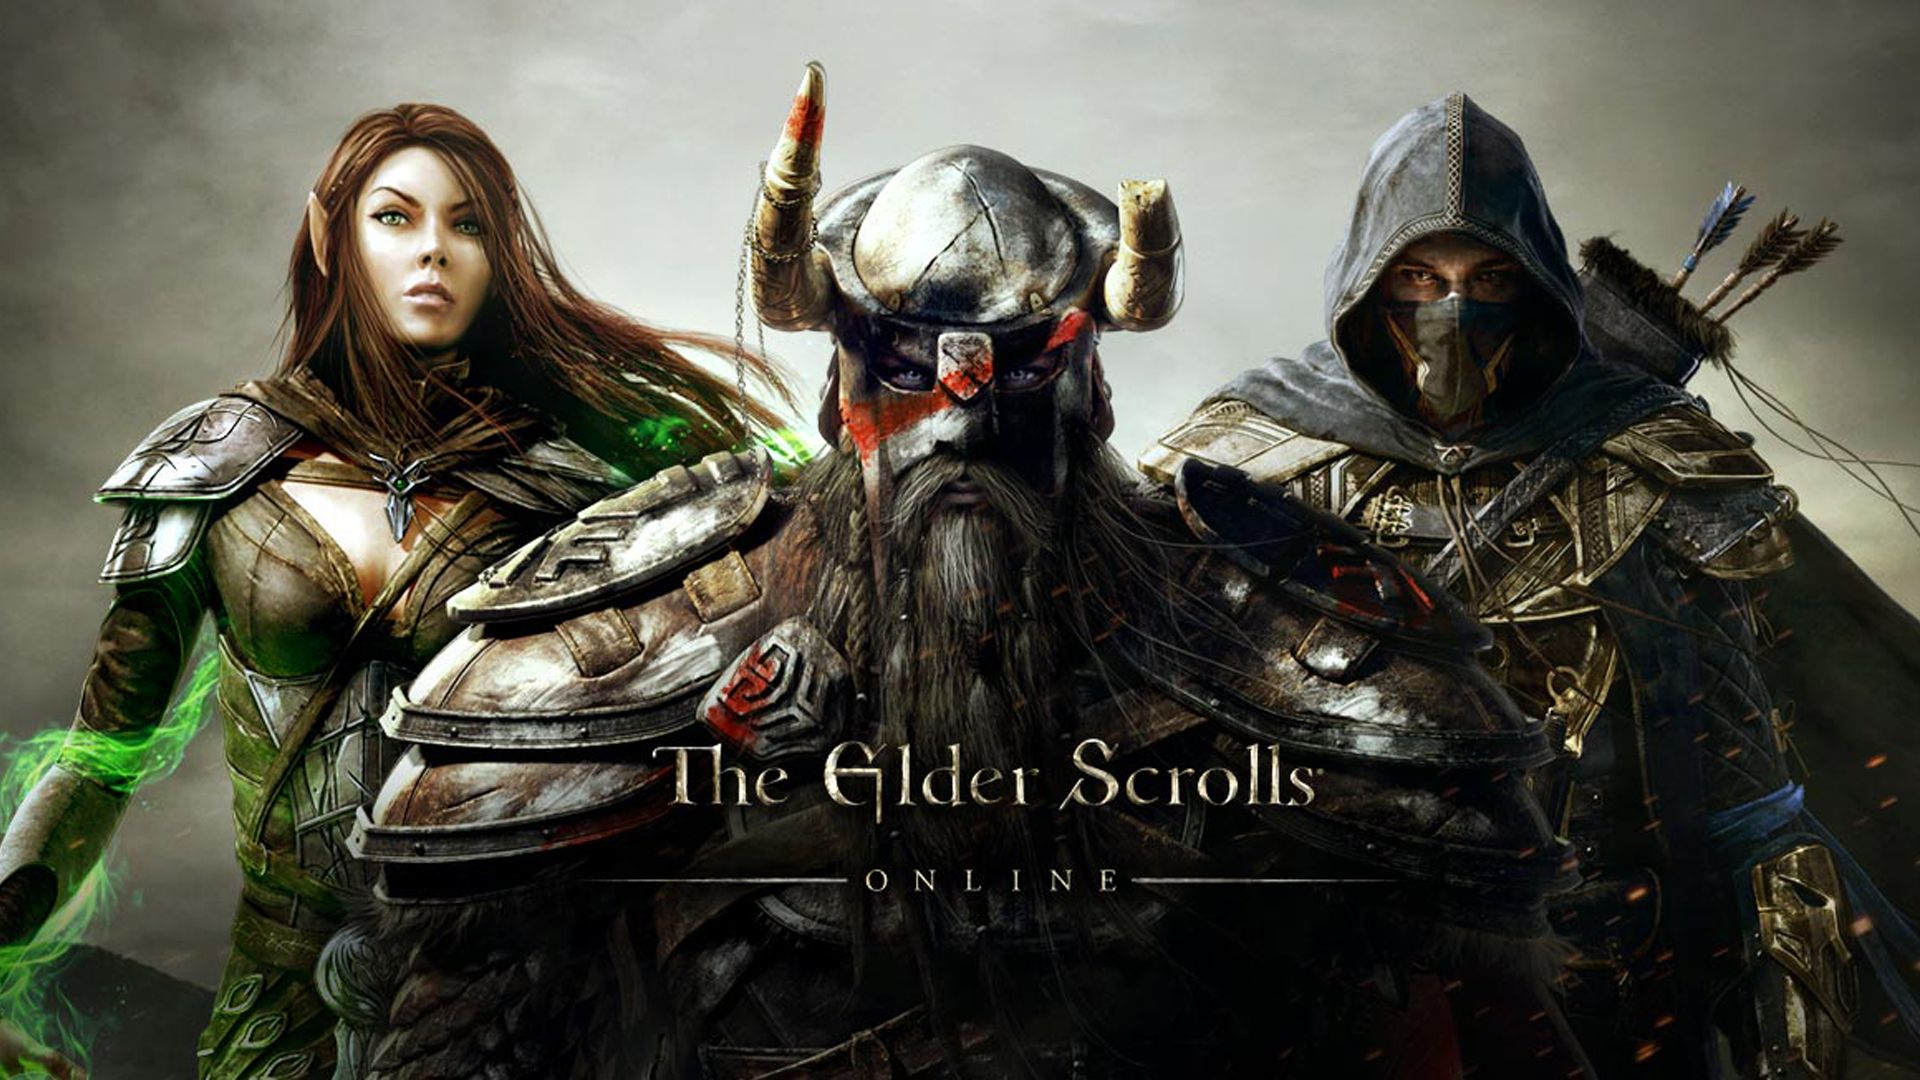 Will The Elder Scrolls Online Go To F2P Route?